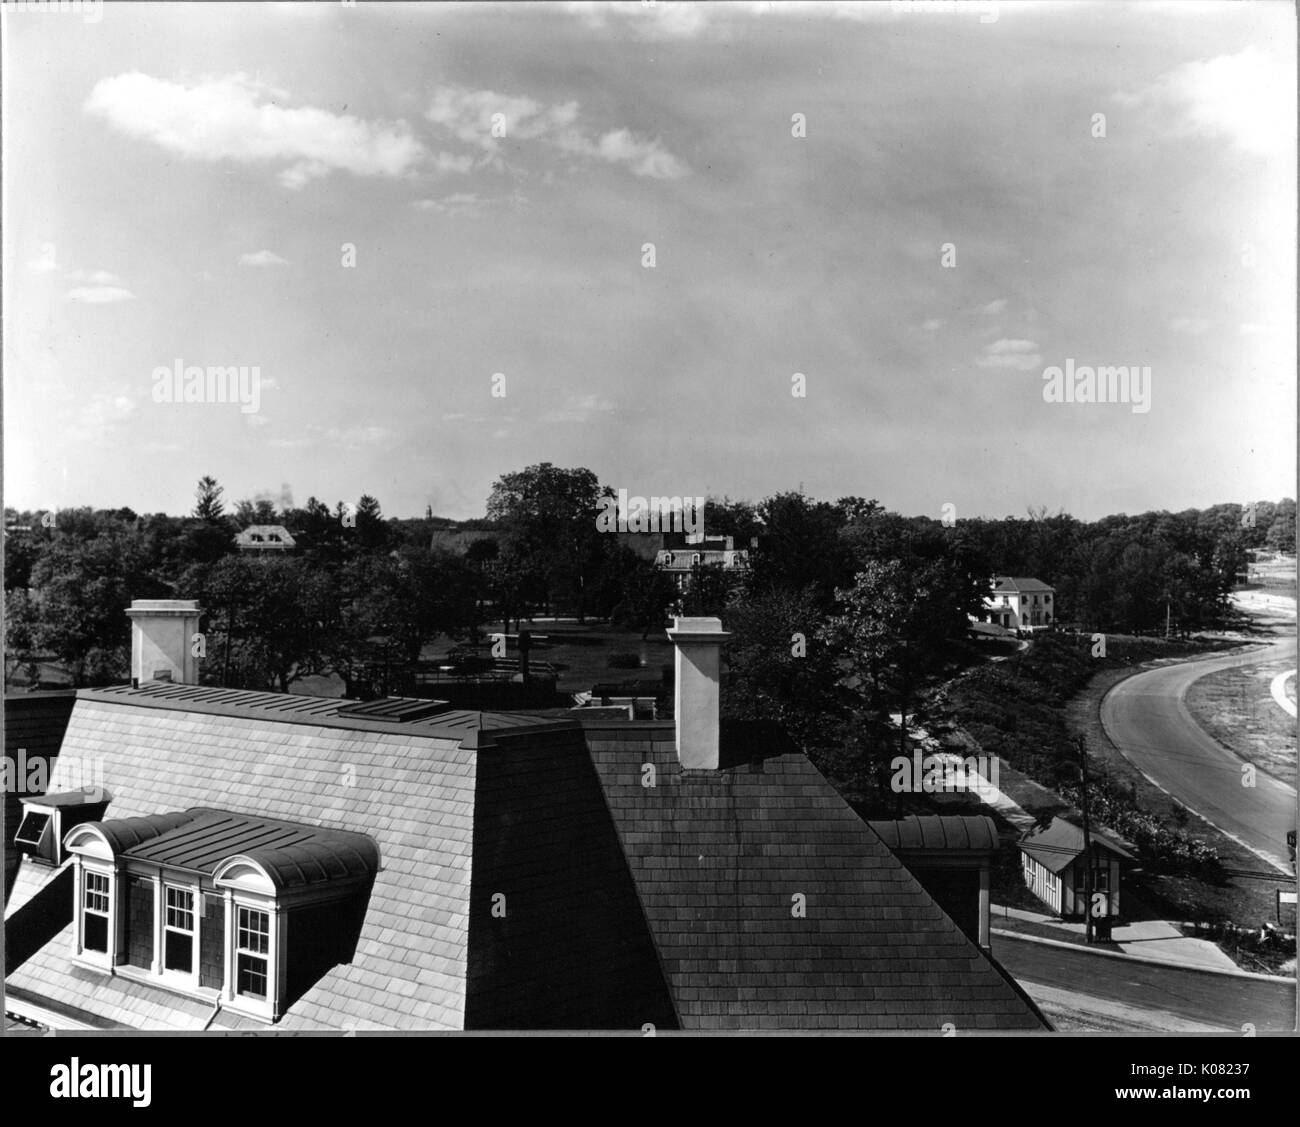 Aerial shot of a neighborhood in Baltimore, Maryland, showing the roof of a house with dormer windows and two chimneys, a road, many trees, and partially-obscured homes in the background, 1910. Stock Photo